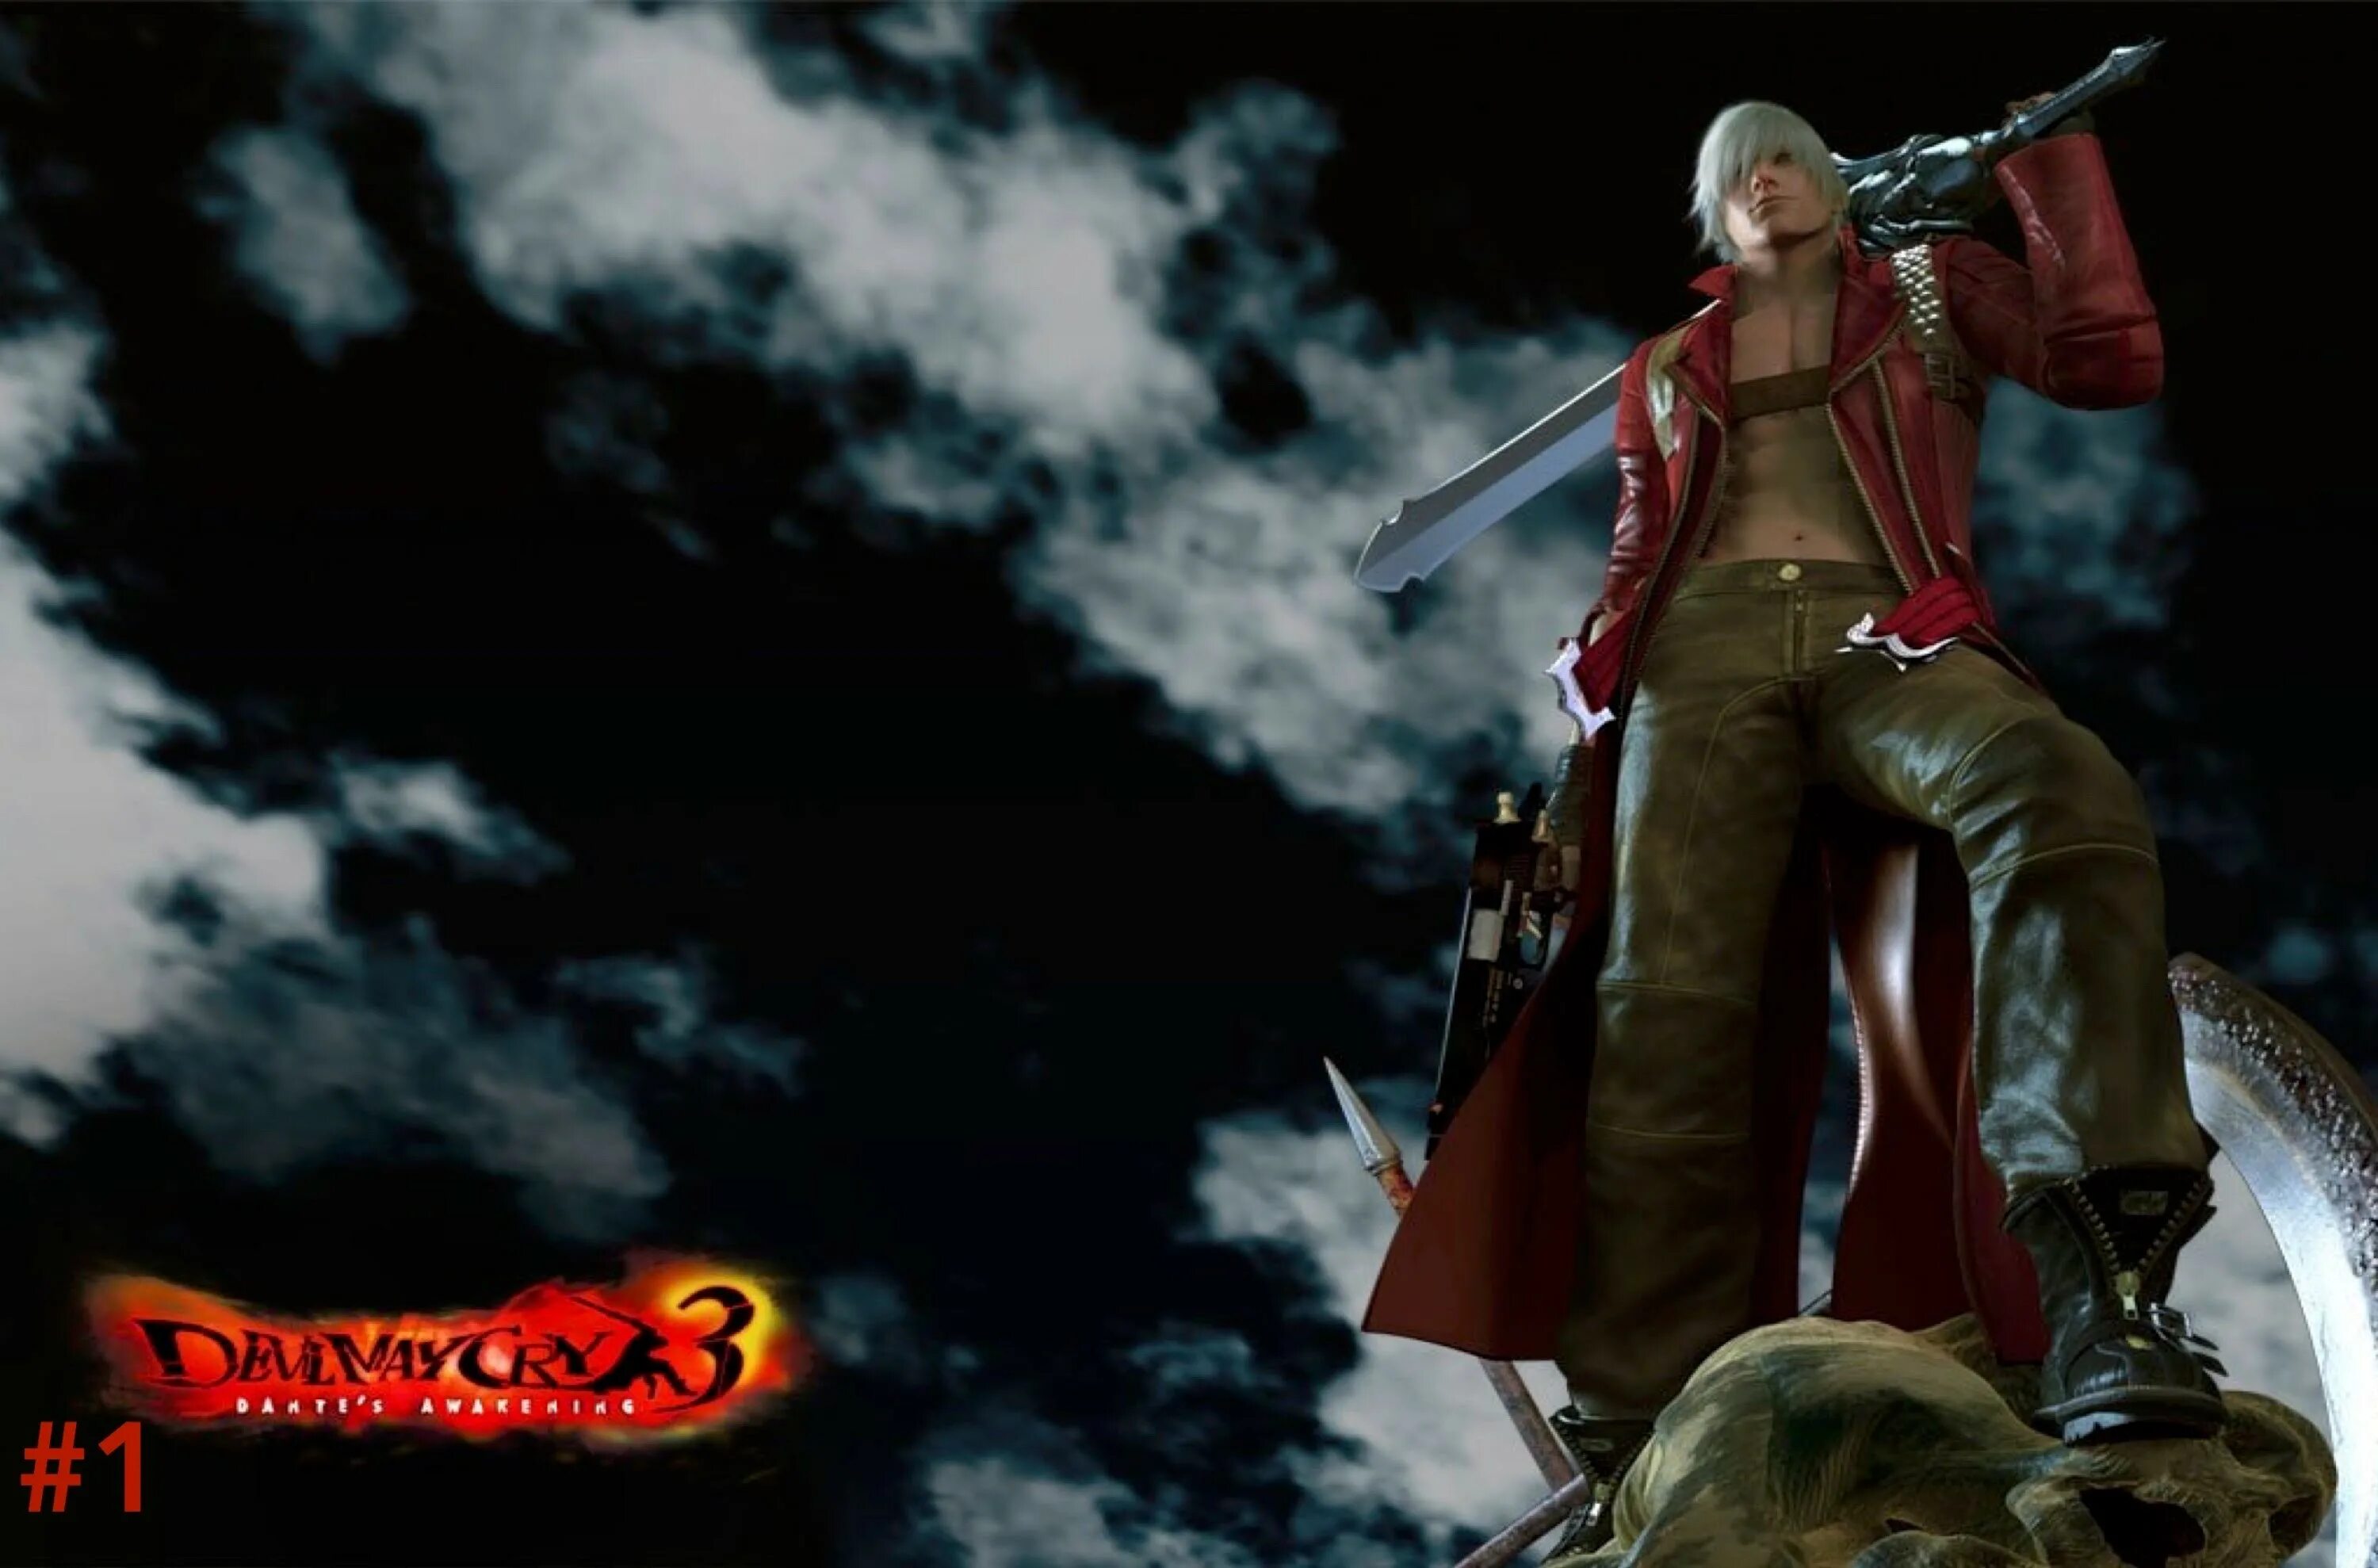 DMC 3 Special Edition. Devil May Cry 3 Special Edition. Данте ДМС 3. Devil May Cry 3 Dante s Awakening. Dmc 3 special